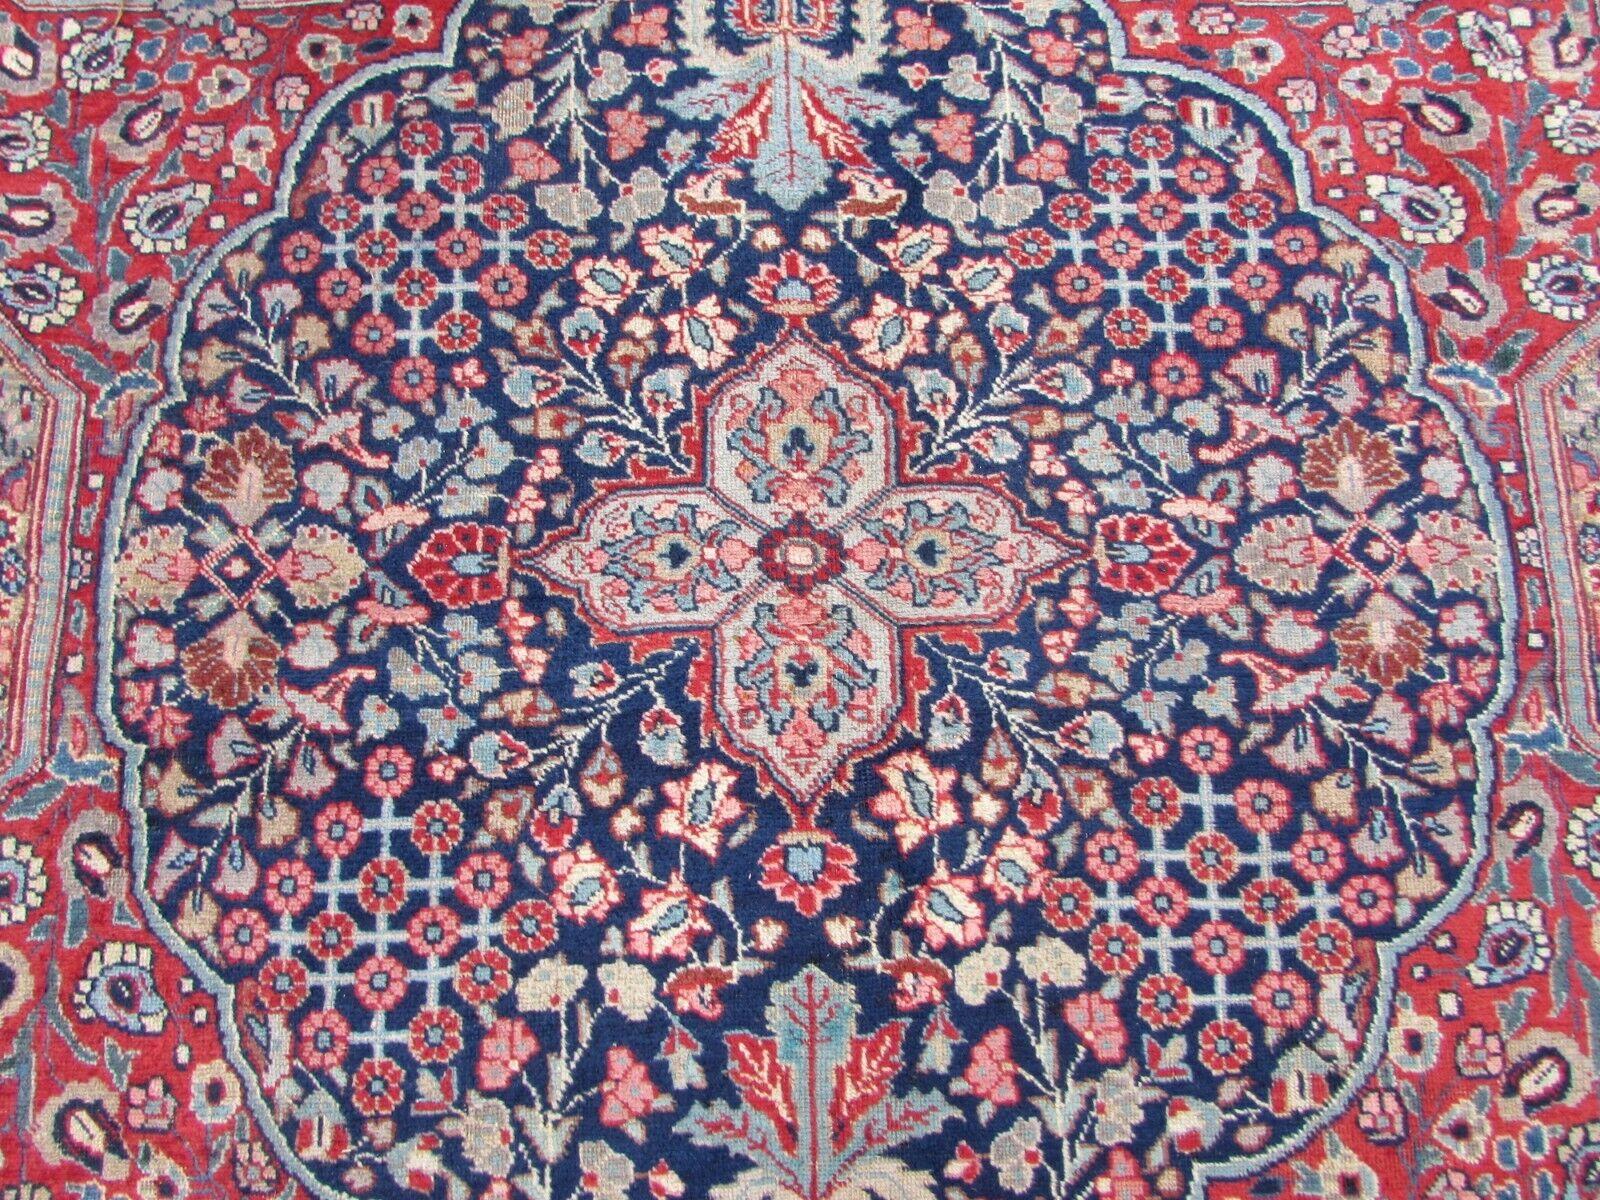 Handmade Vintage Persian Style Kazvin Rug 9.3' x 12.3', 1970s - 1Q68 For Sale 2